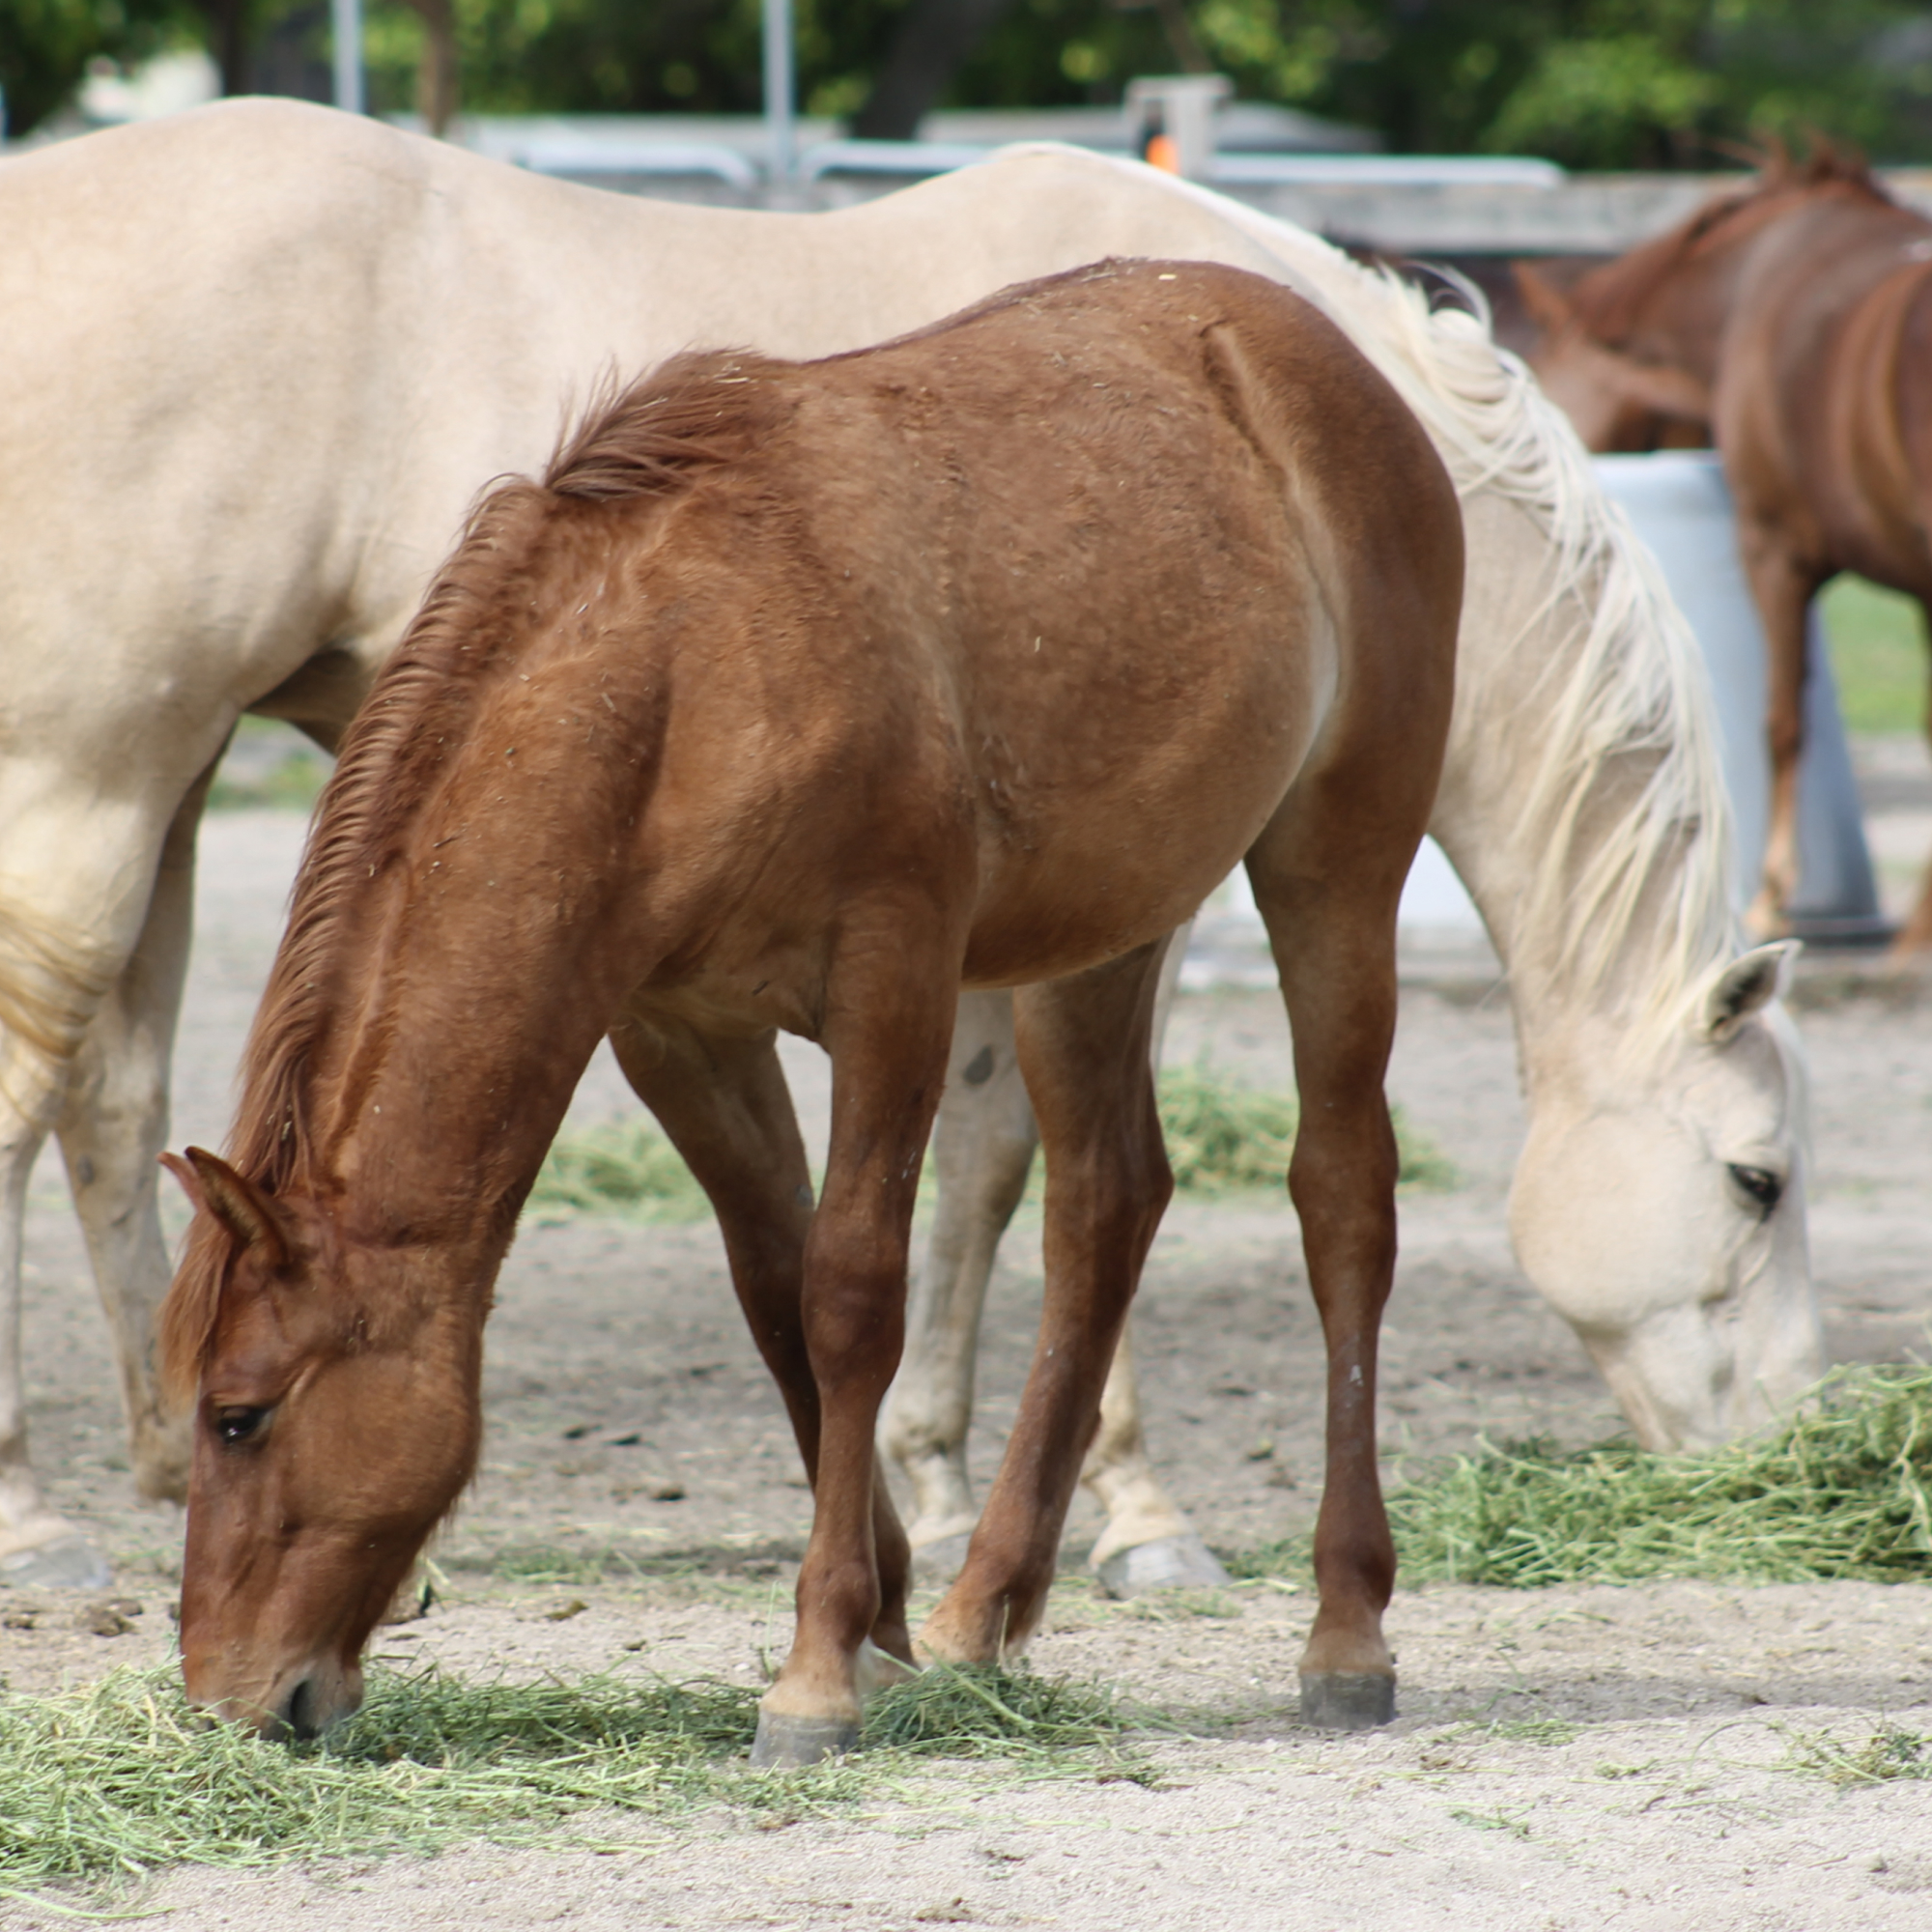 SFSPCA works tirelessly for abused horses and livestock